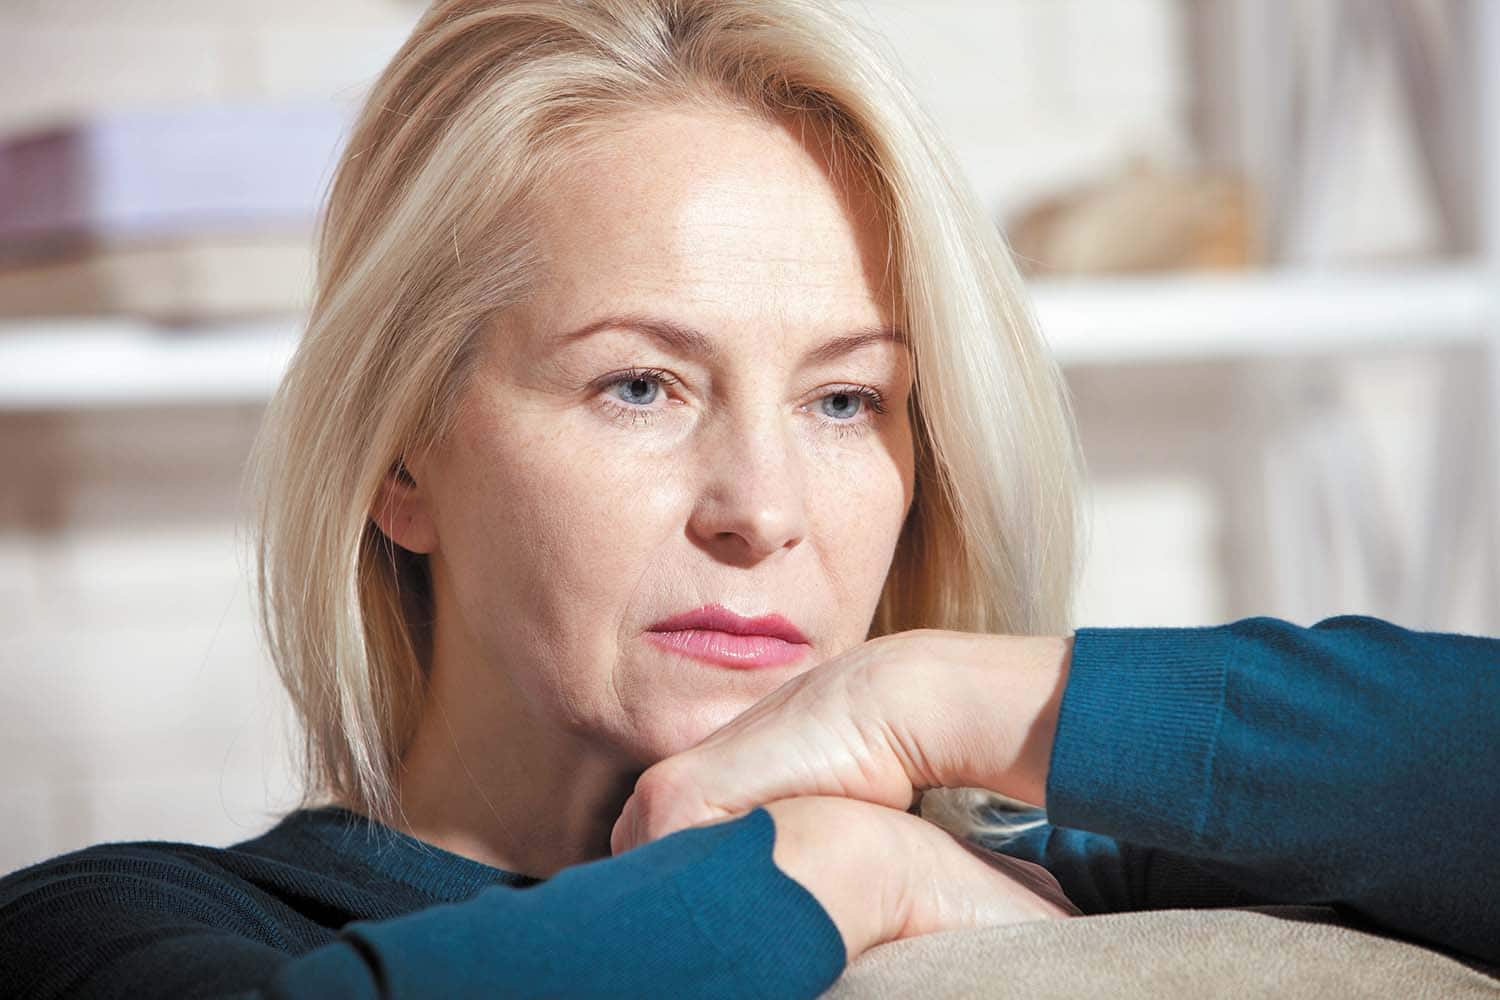 Does Menopause Cause Mental Health Issues?